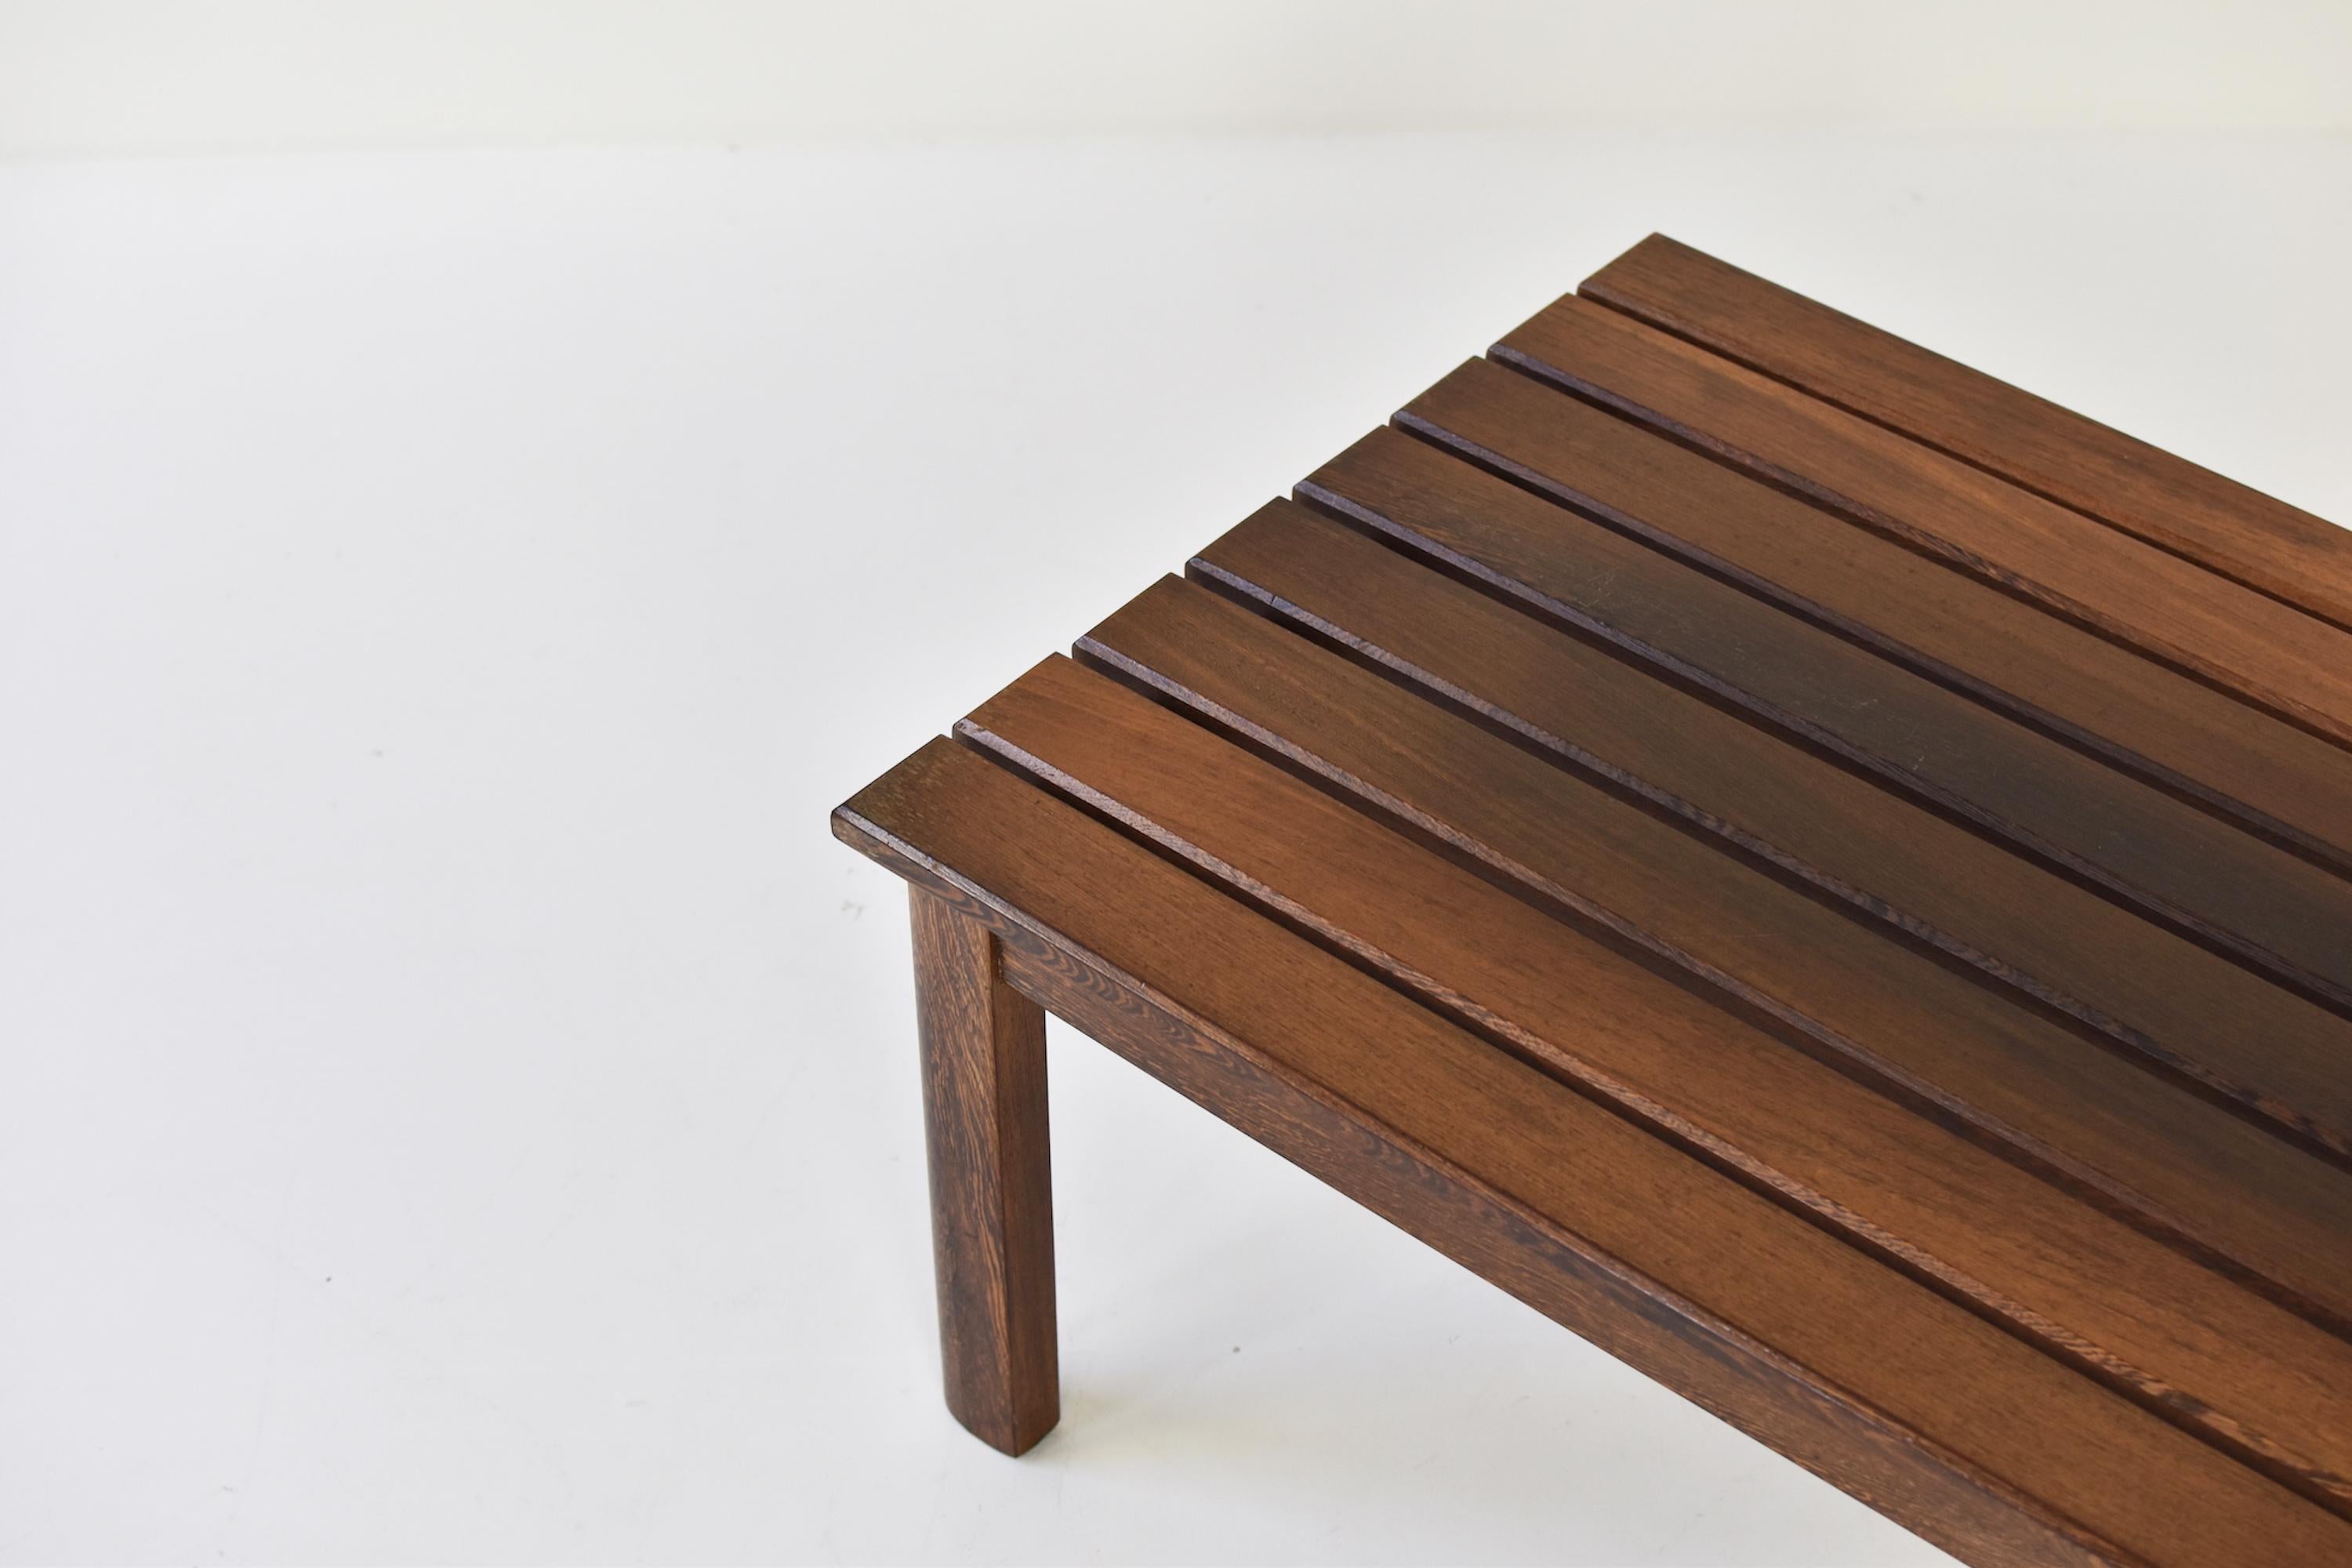 European Slat Bench or Coffee Table in Ash and Wenge Dating from the 1960’s